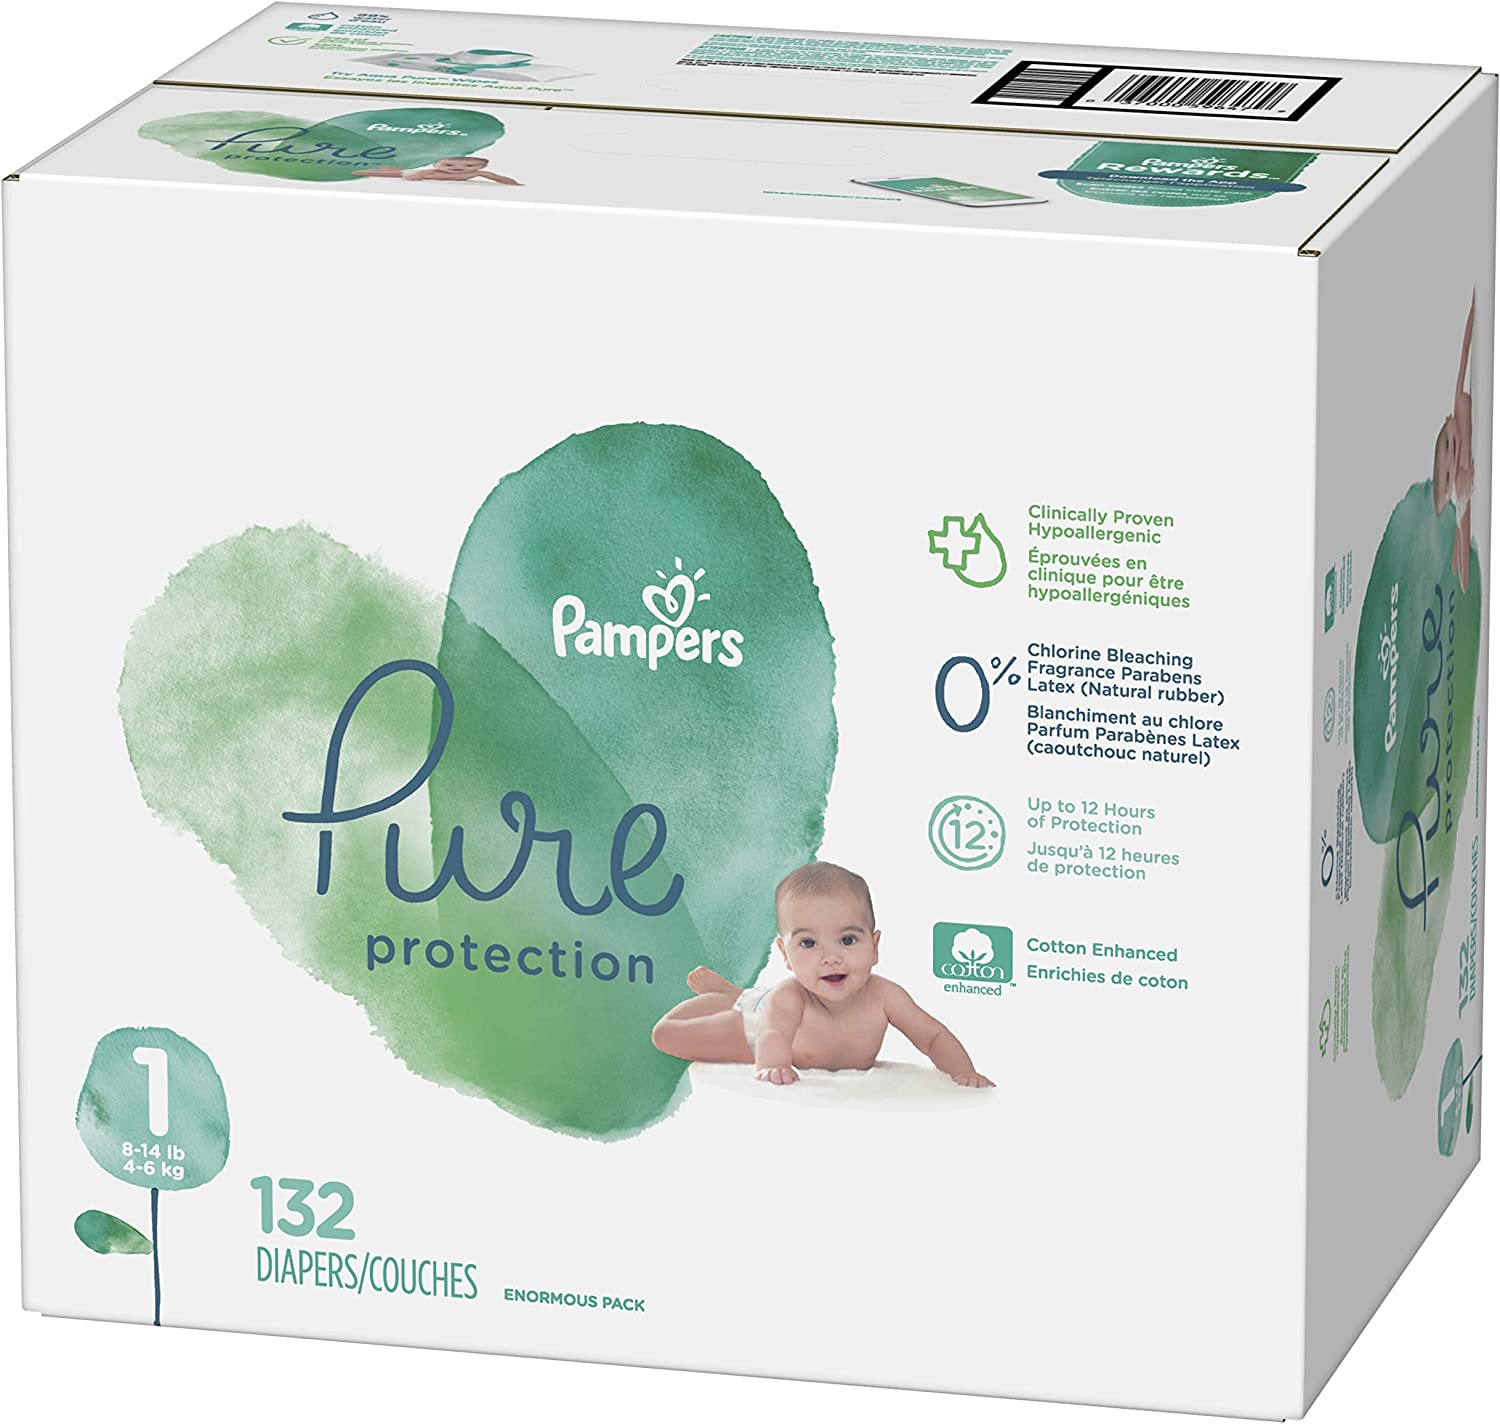 Diapers Size 1, 132 Count – Pampers Pure Protection Disposable Baby Diapers, Hypoallergenic and Unscented Protection, Enormous Pack (Packaging & Prints May Vary)